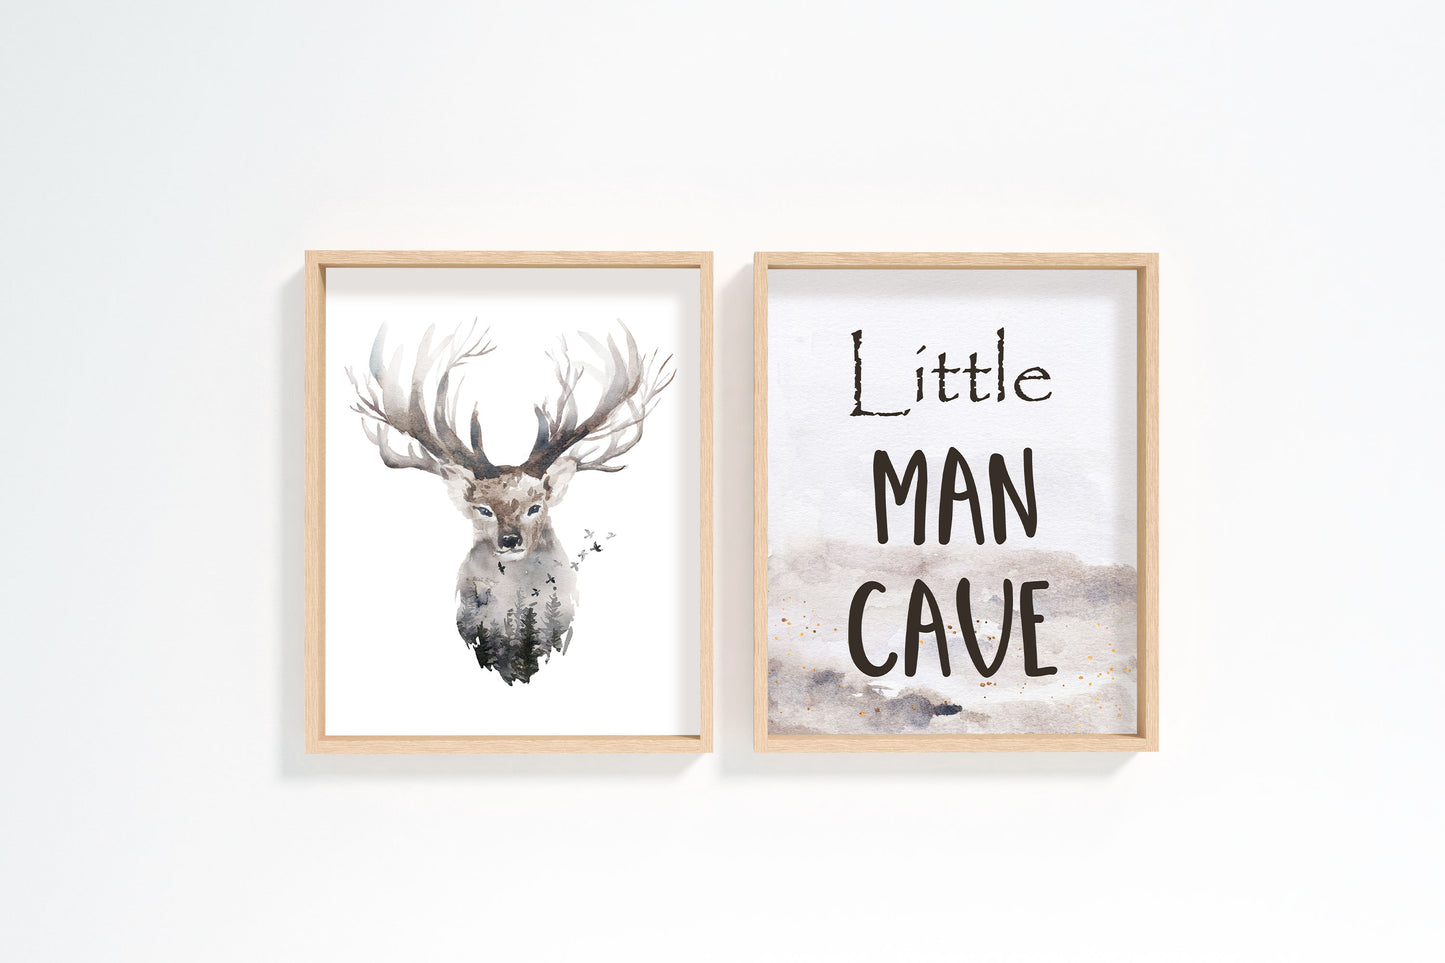 Little Man Cave Printable Wall Art, Woodland Nursery Prints Set of 2 - Enchanted Forest